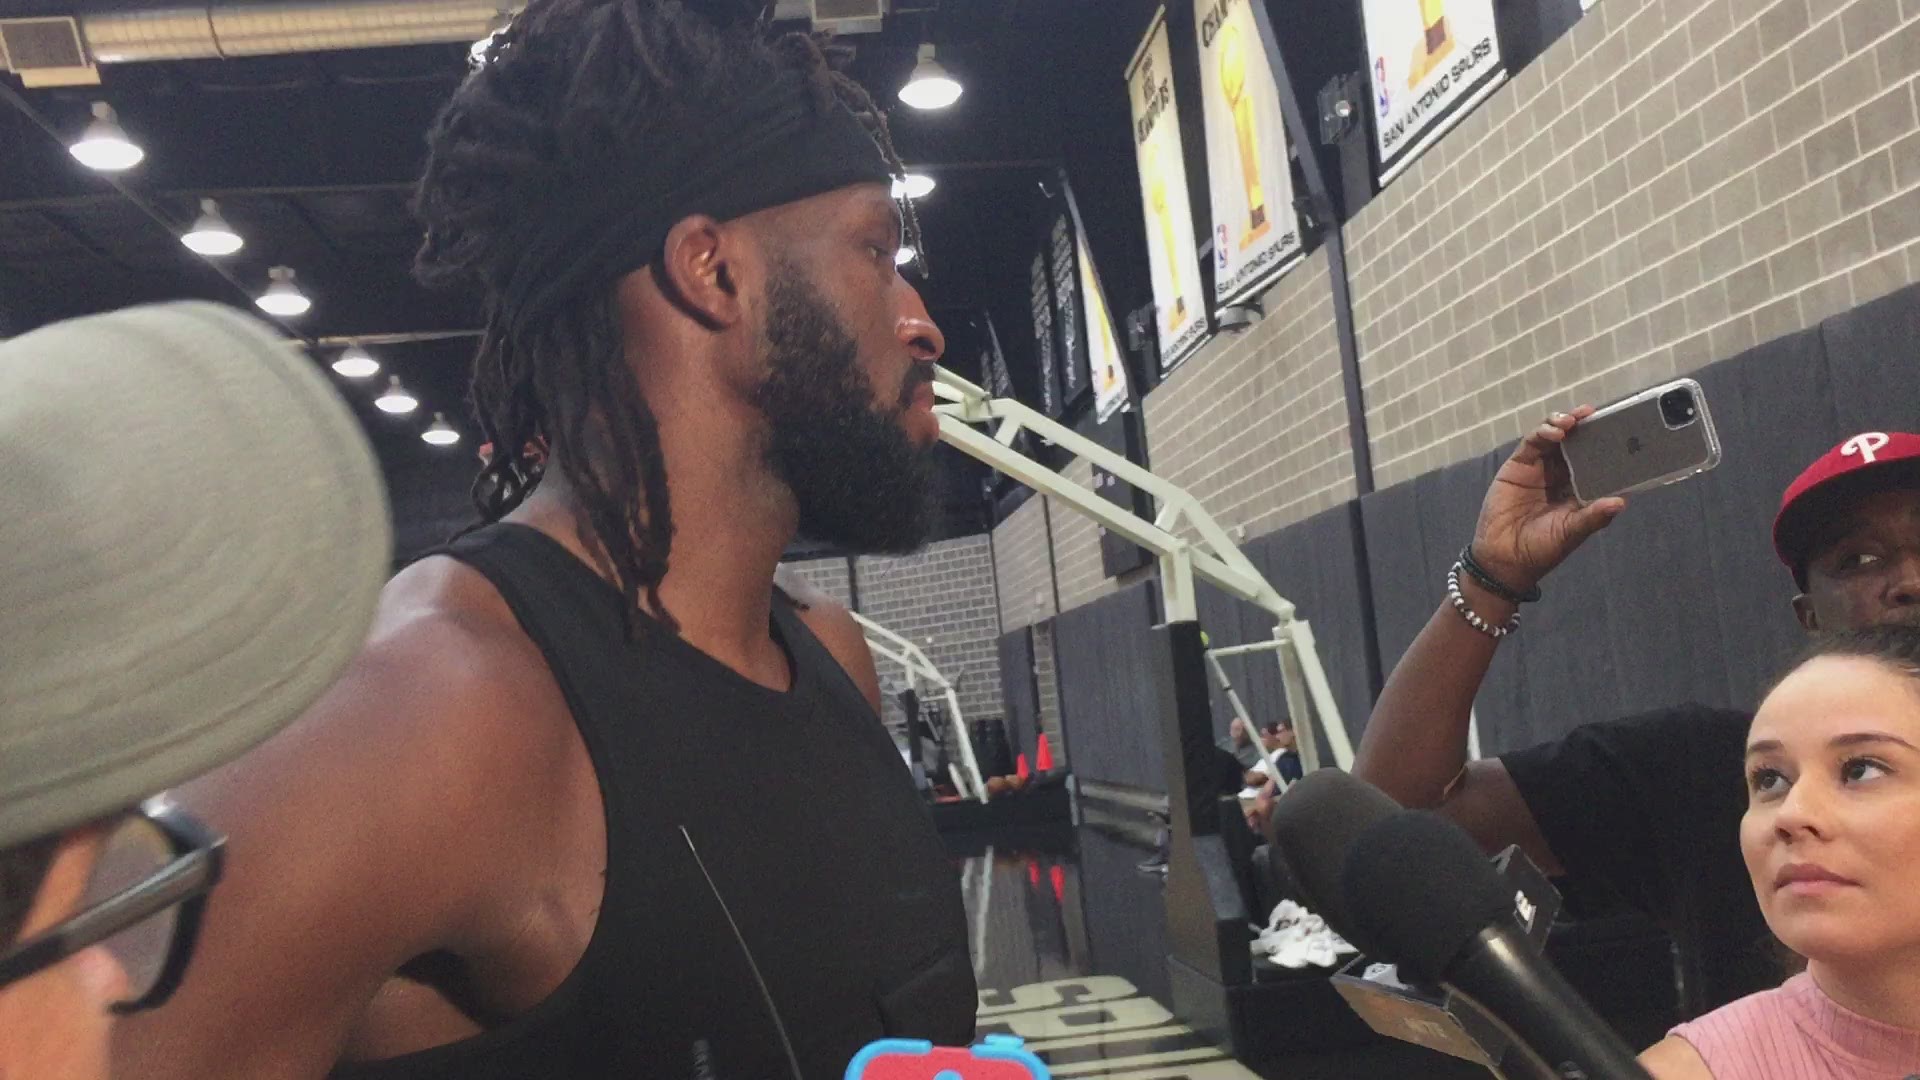 New Spurs forward DeMarre Carroll on playing defense